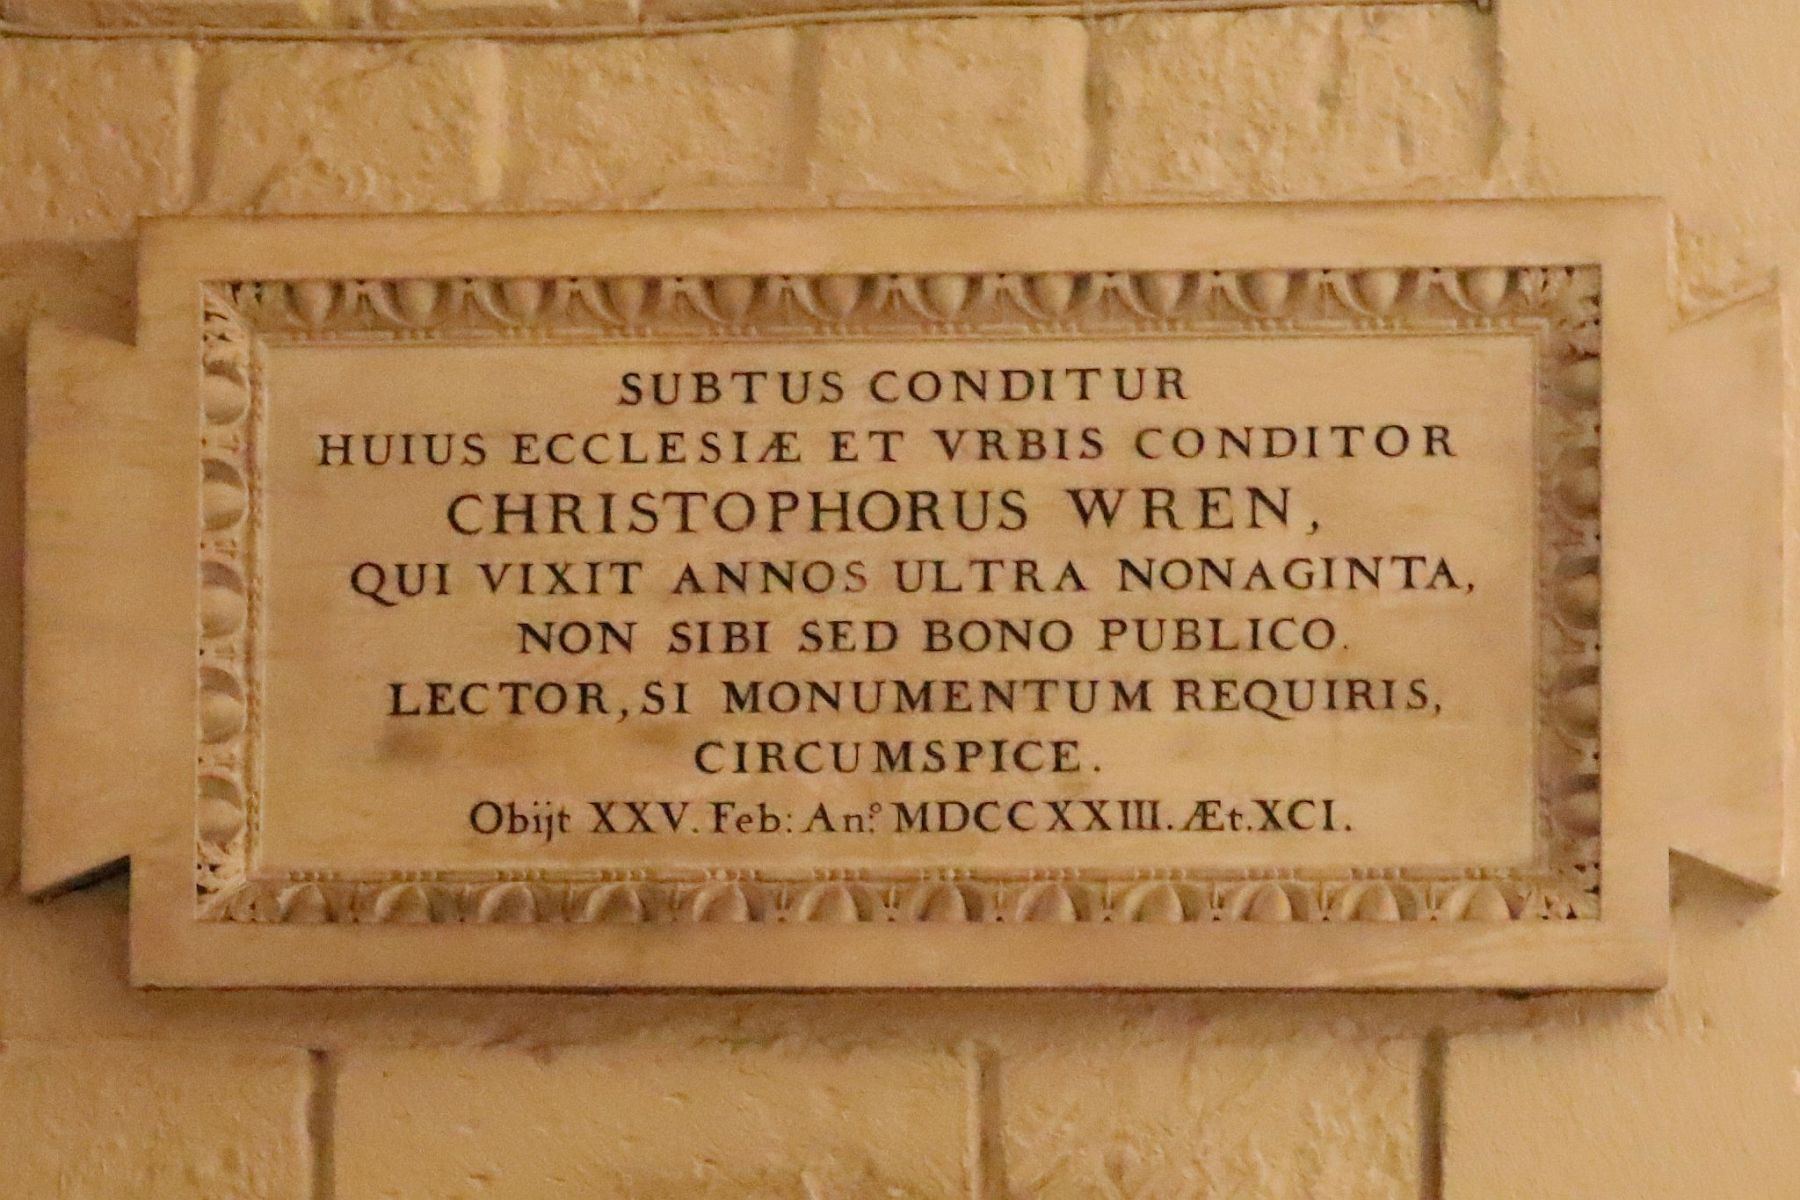 Memorial plaque for Sir Christopher Wren in the crypt of St. Paul's cathedral, London. 29-Oct-2023. "Reader, if you seek his monument – look around you"